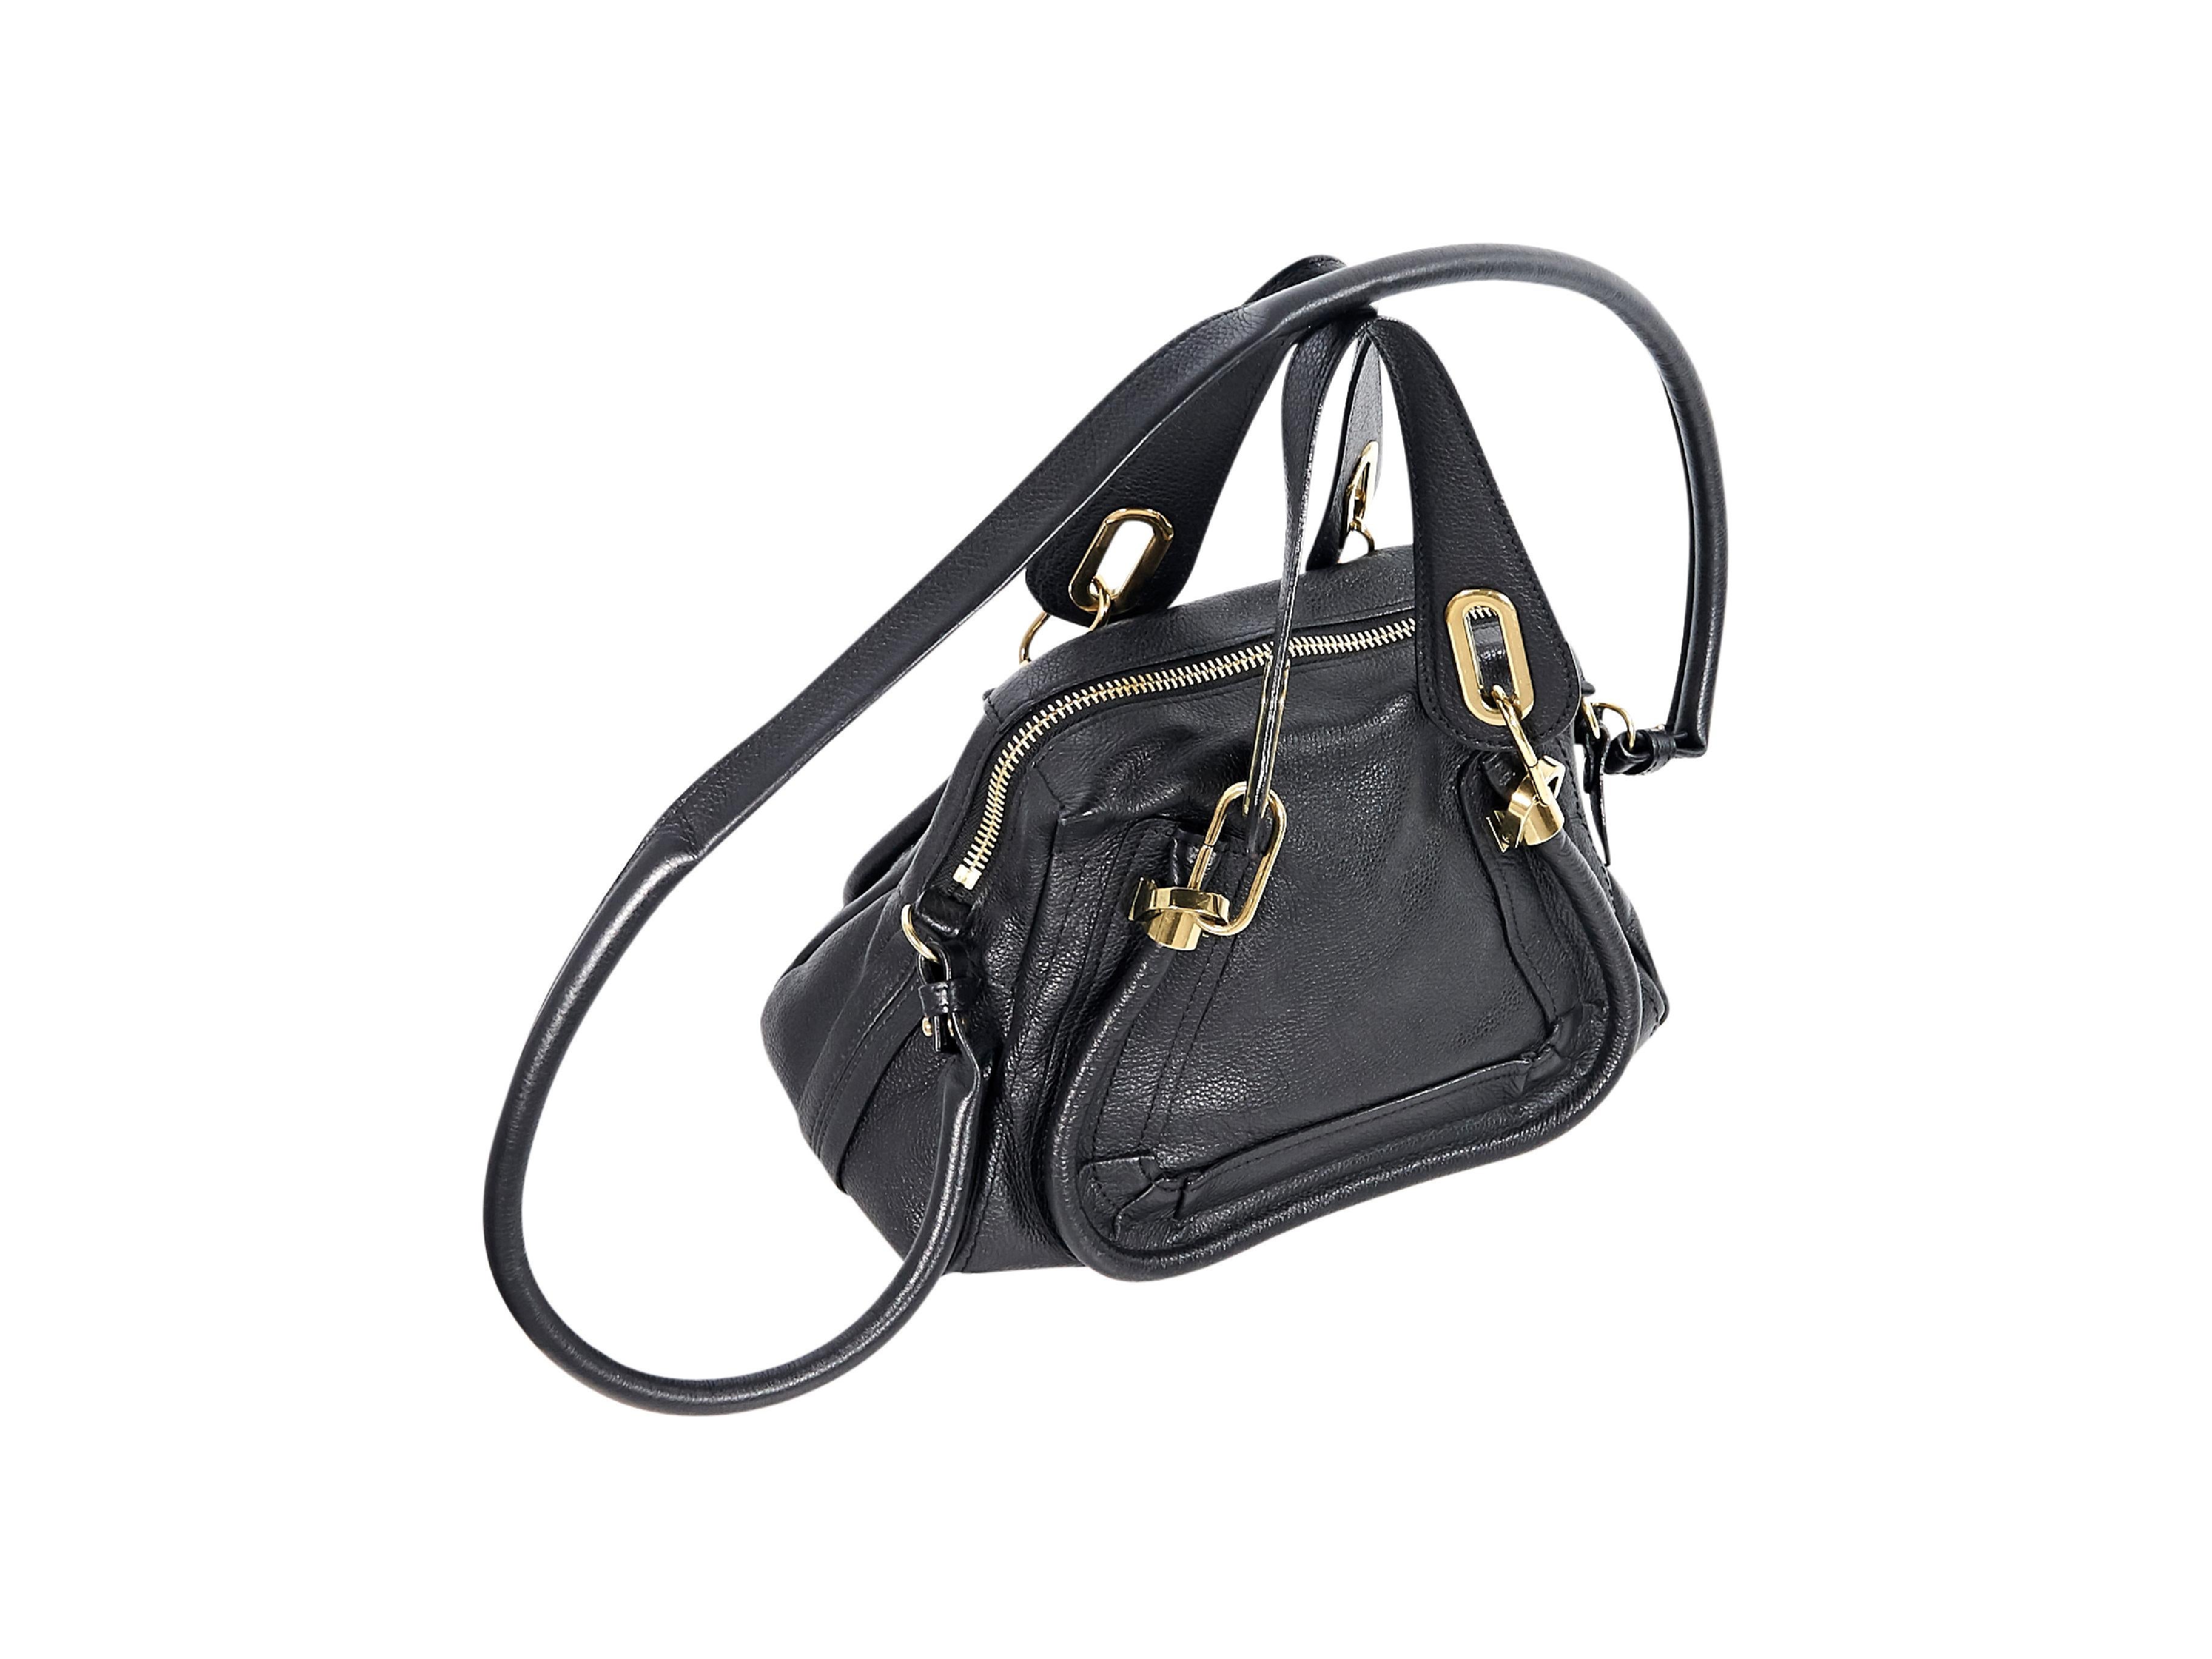 Product details:  Black leather Paraty satchel handbag by Chloe.  Dual carry handles.  Single crossbody strap.  Top zip closure.  Lined interior with inner zip and slide pockets.  Goldtone hardware.  9.25